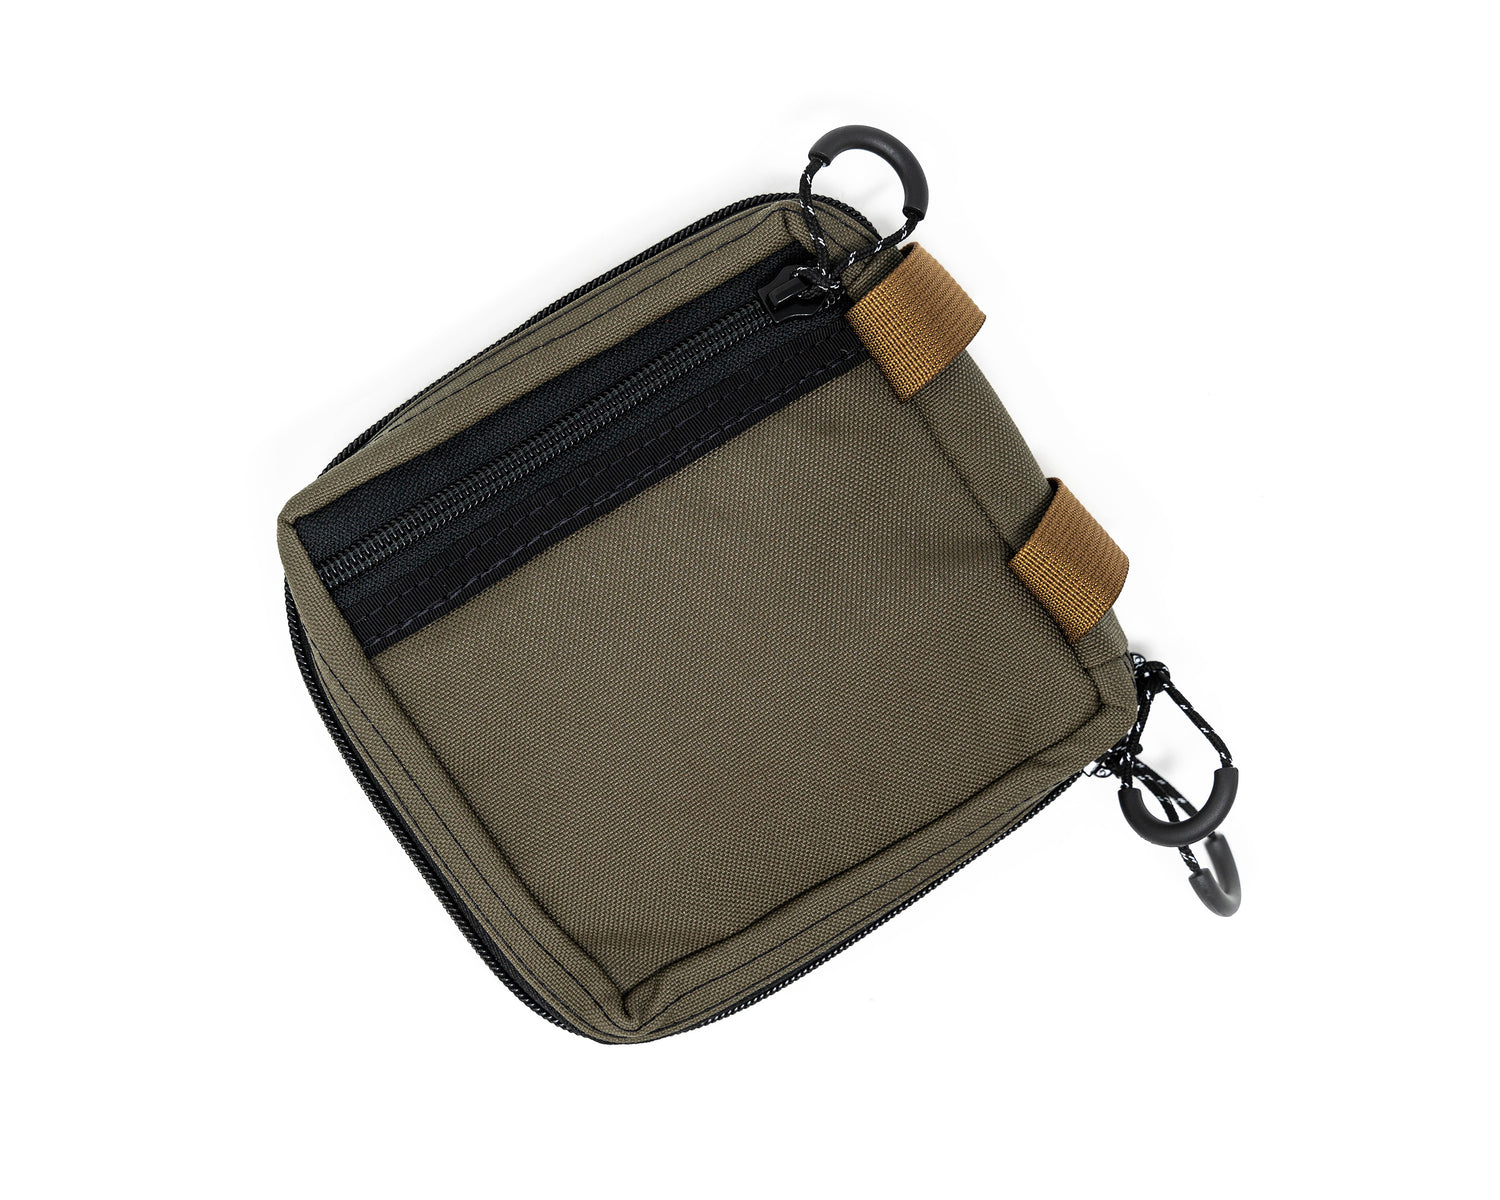 Carry Commission / Blue Ridge Overland Gear EDC Pouch Bundle back overhead view on white background